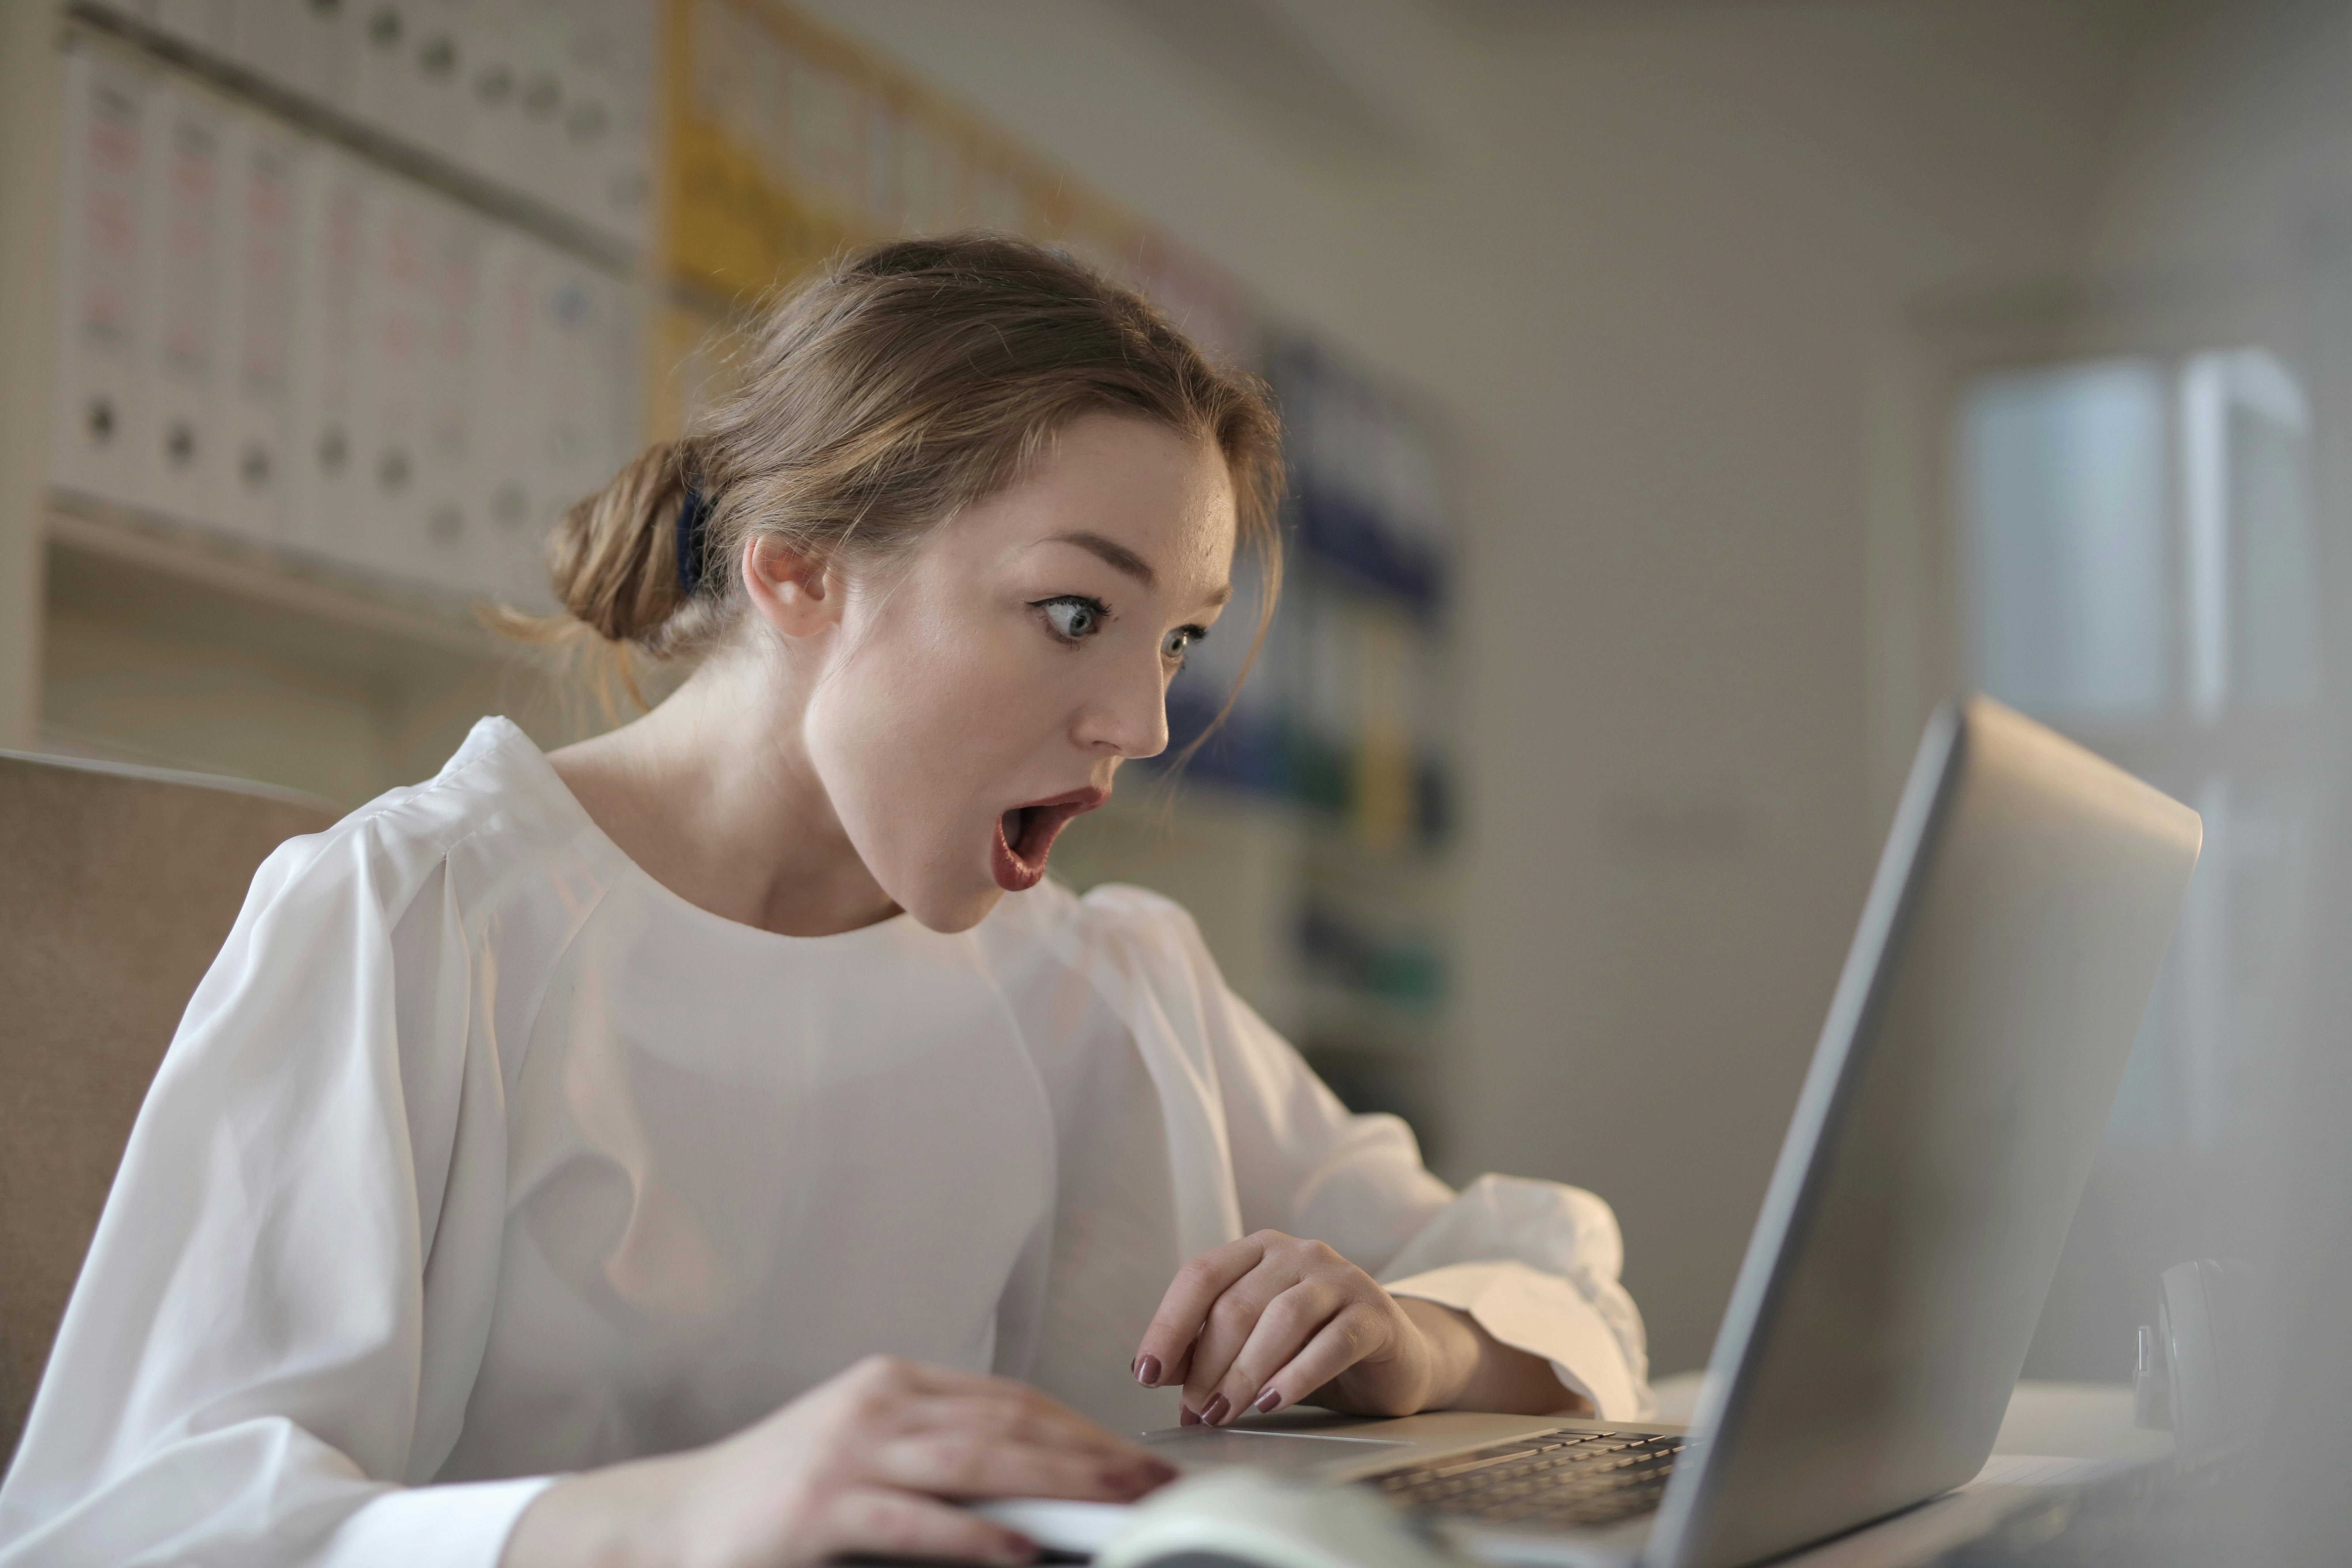 A shocked woman looking at a laptop | Source: Pexels